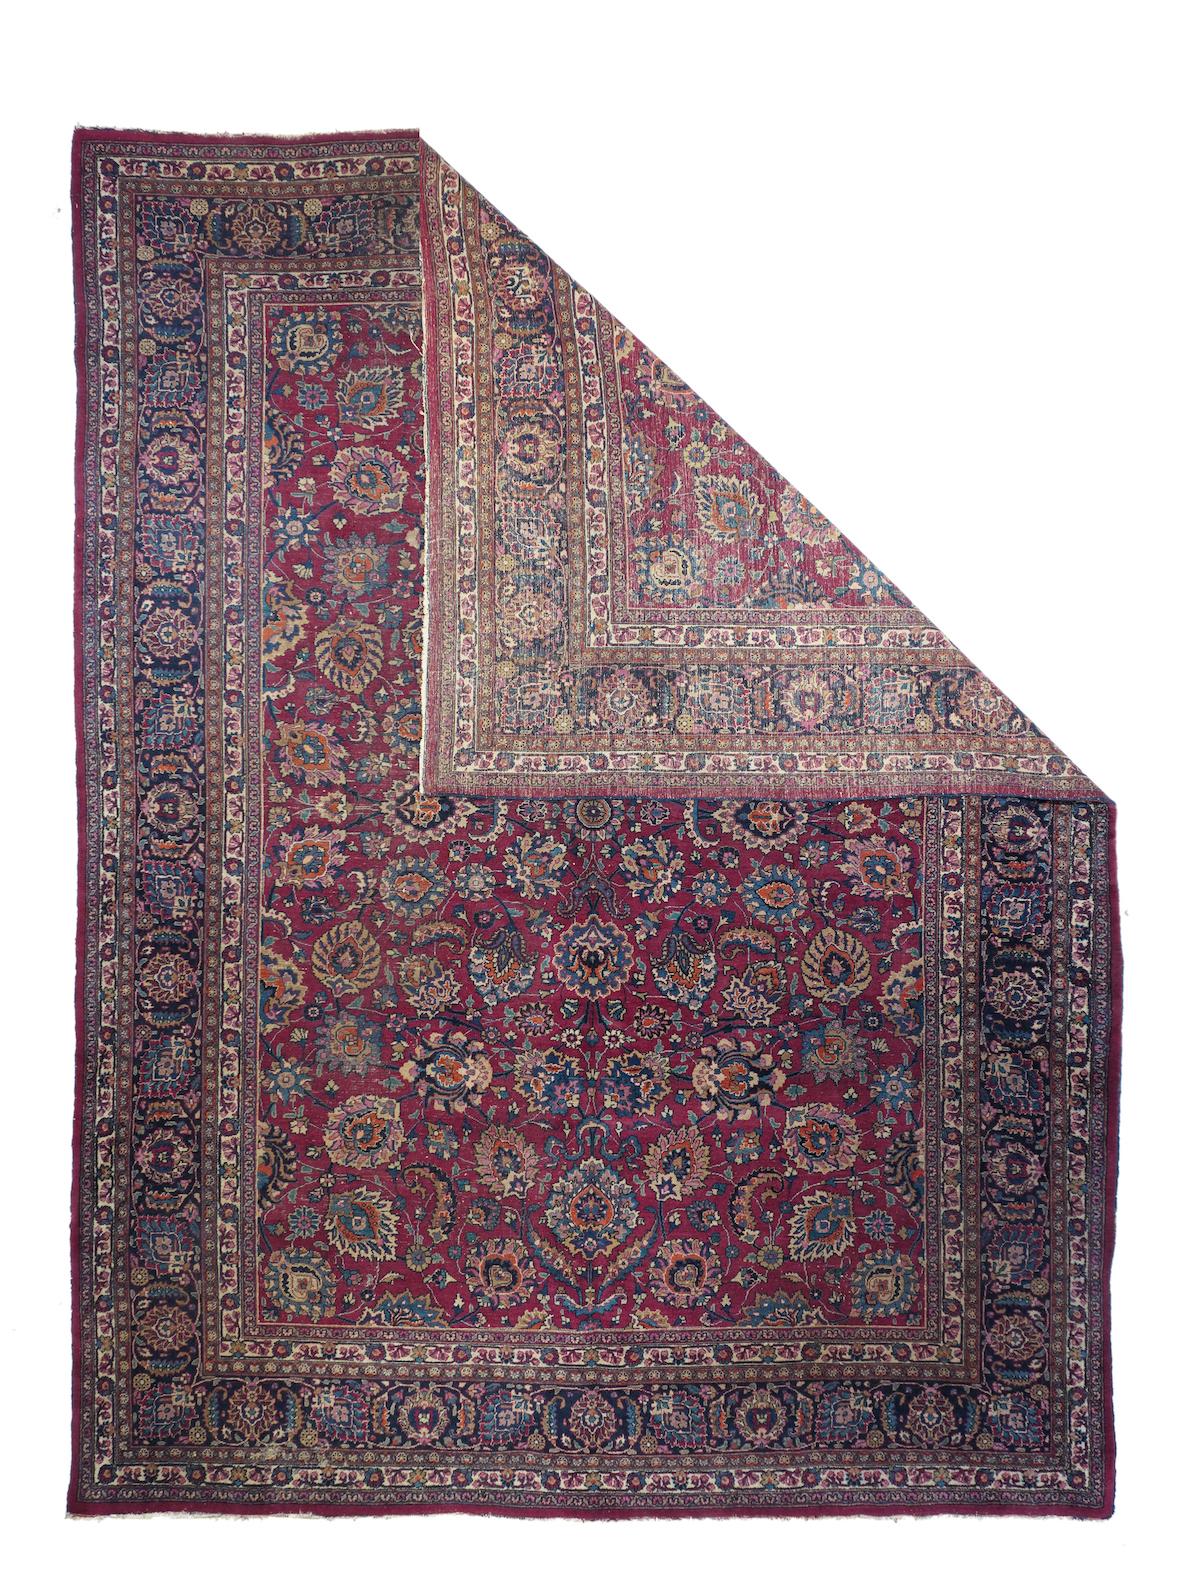 Vintage Mashad rug, measures : 9'8'' x 13'5''. The mulberry-wine red field is densely covered with a four-part centralized pattern of a bewildering assortment pf palmettes petal, crowned, ragged, boteh accented, bitonal, smooth all connected by a